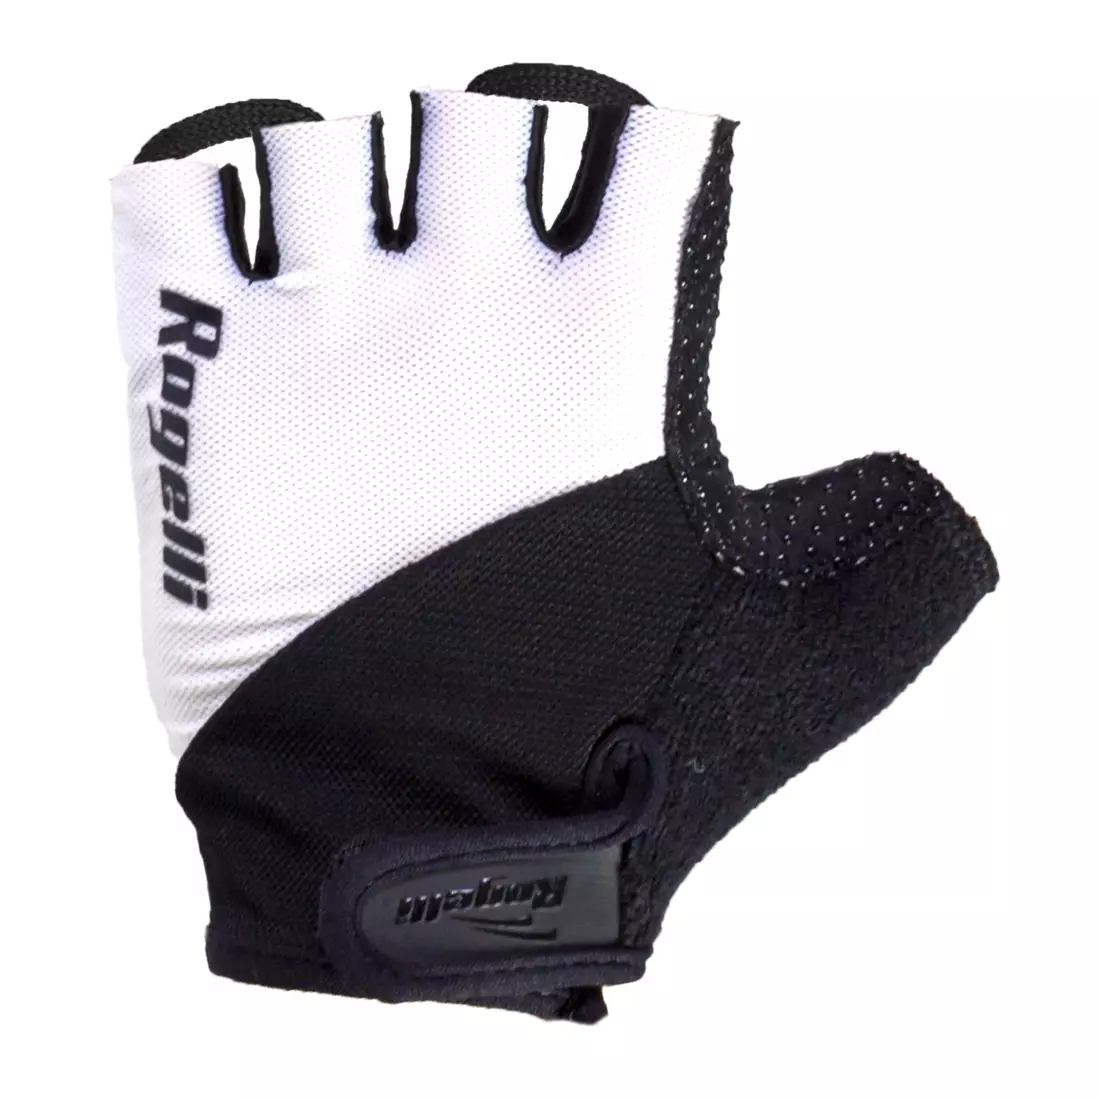 ROGELLI DUCOR cycling gloves, 006.031 white